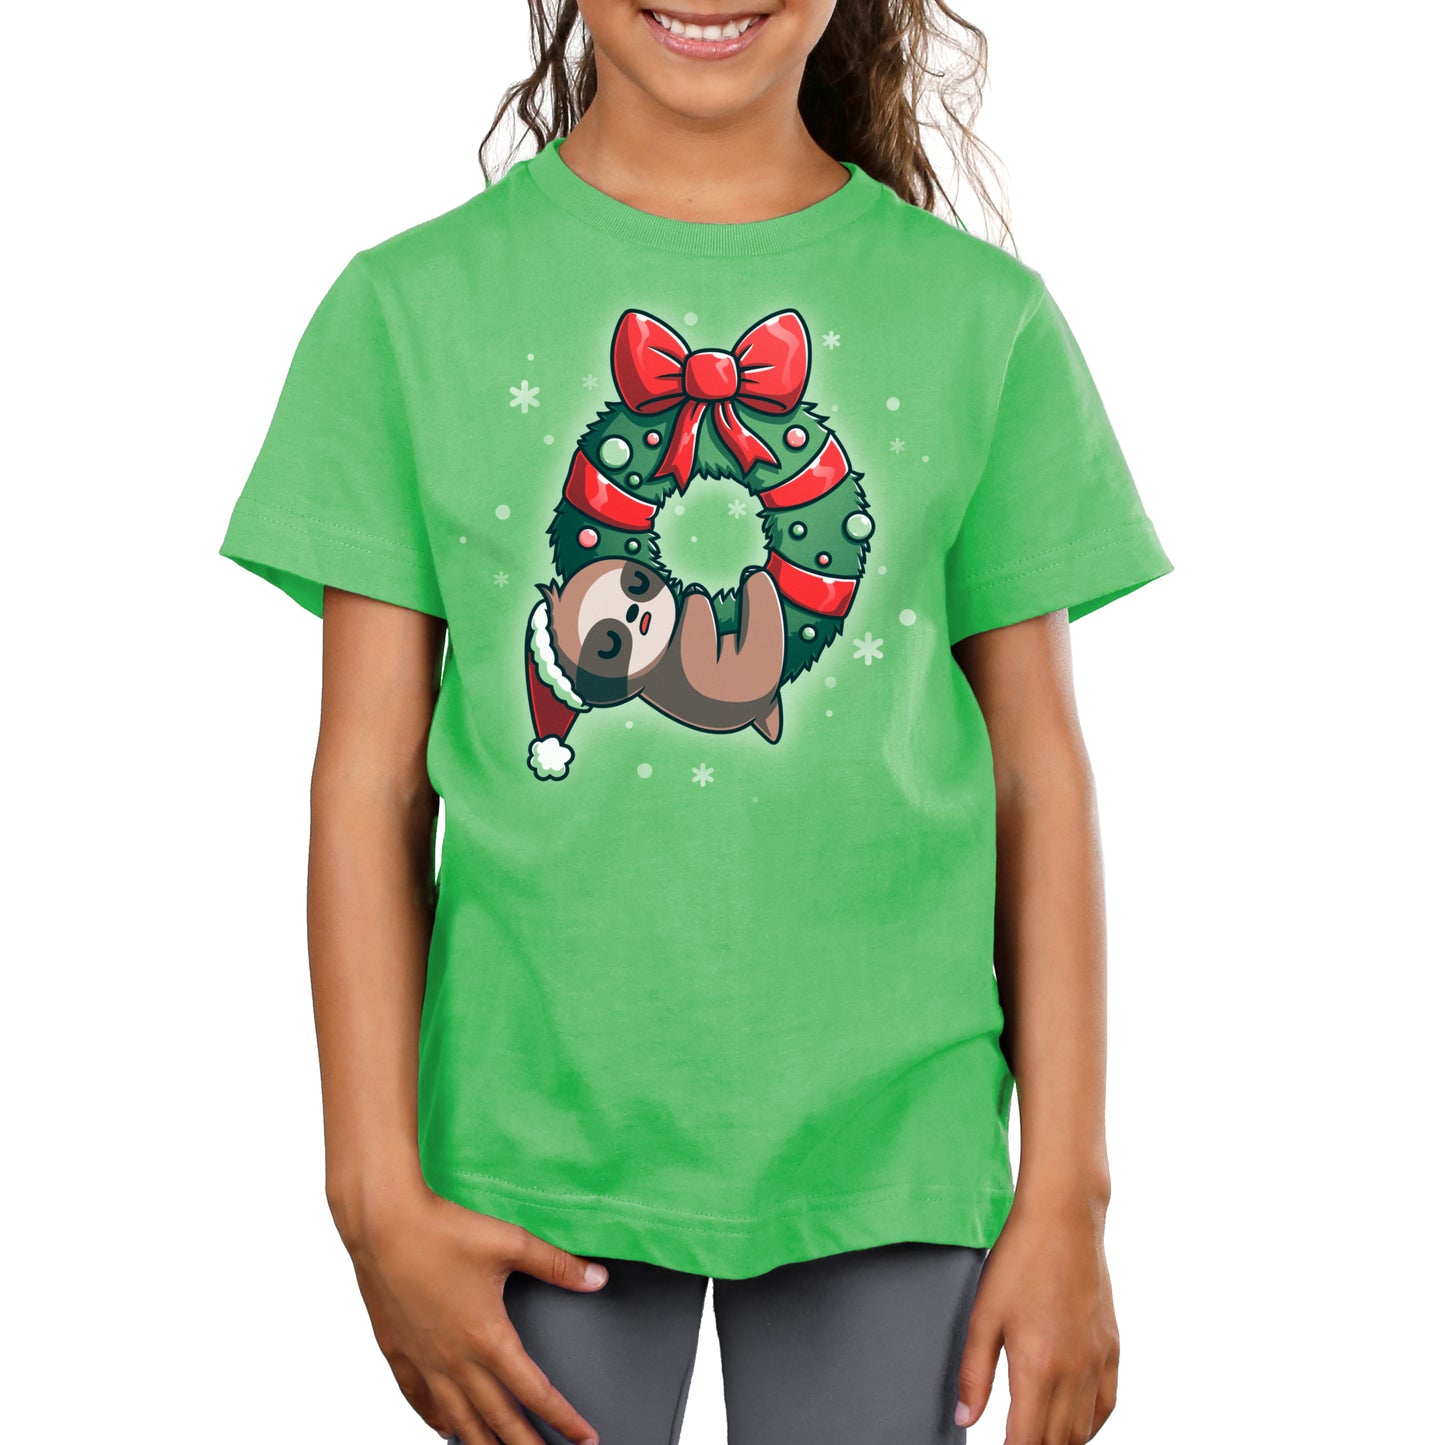 A girl wearing a TeeTurtle t-shirt with "We Wish You a Lazy Christmas" sloth on it.